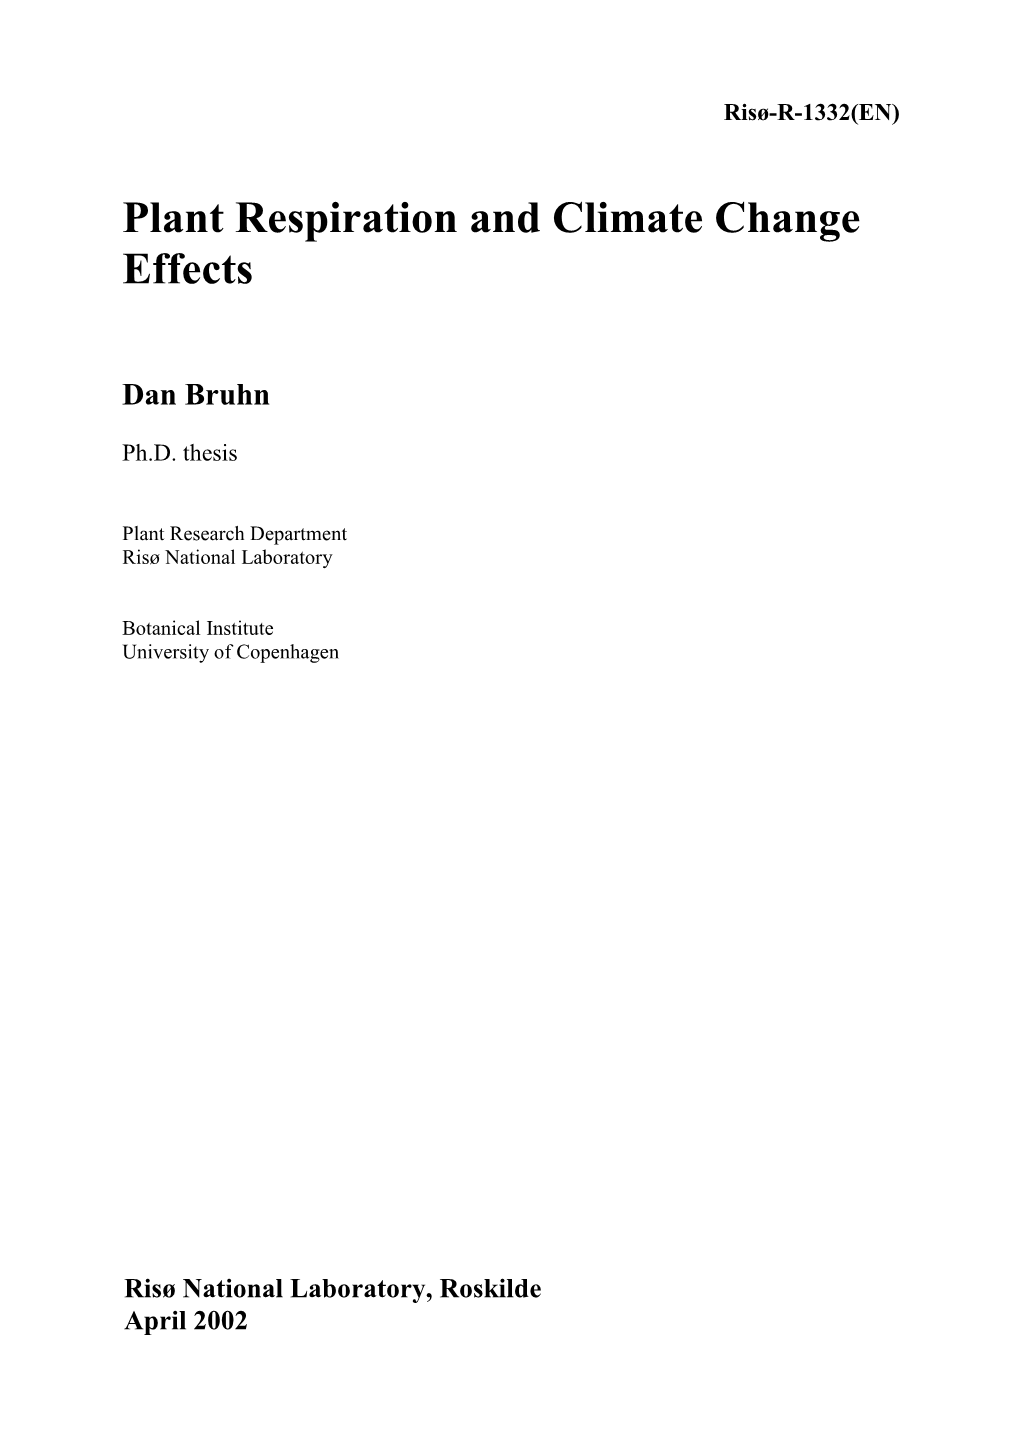 Plant Respiration and Climate Change Effects